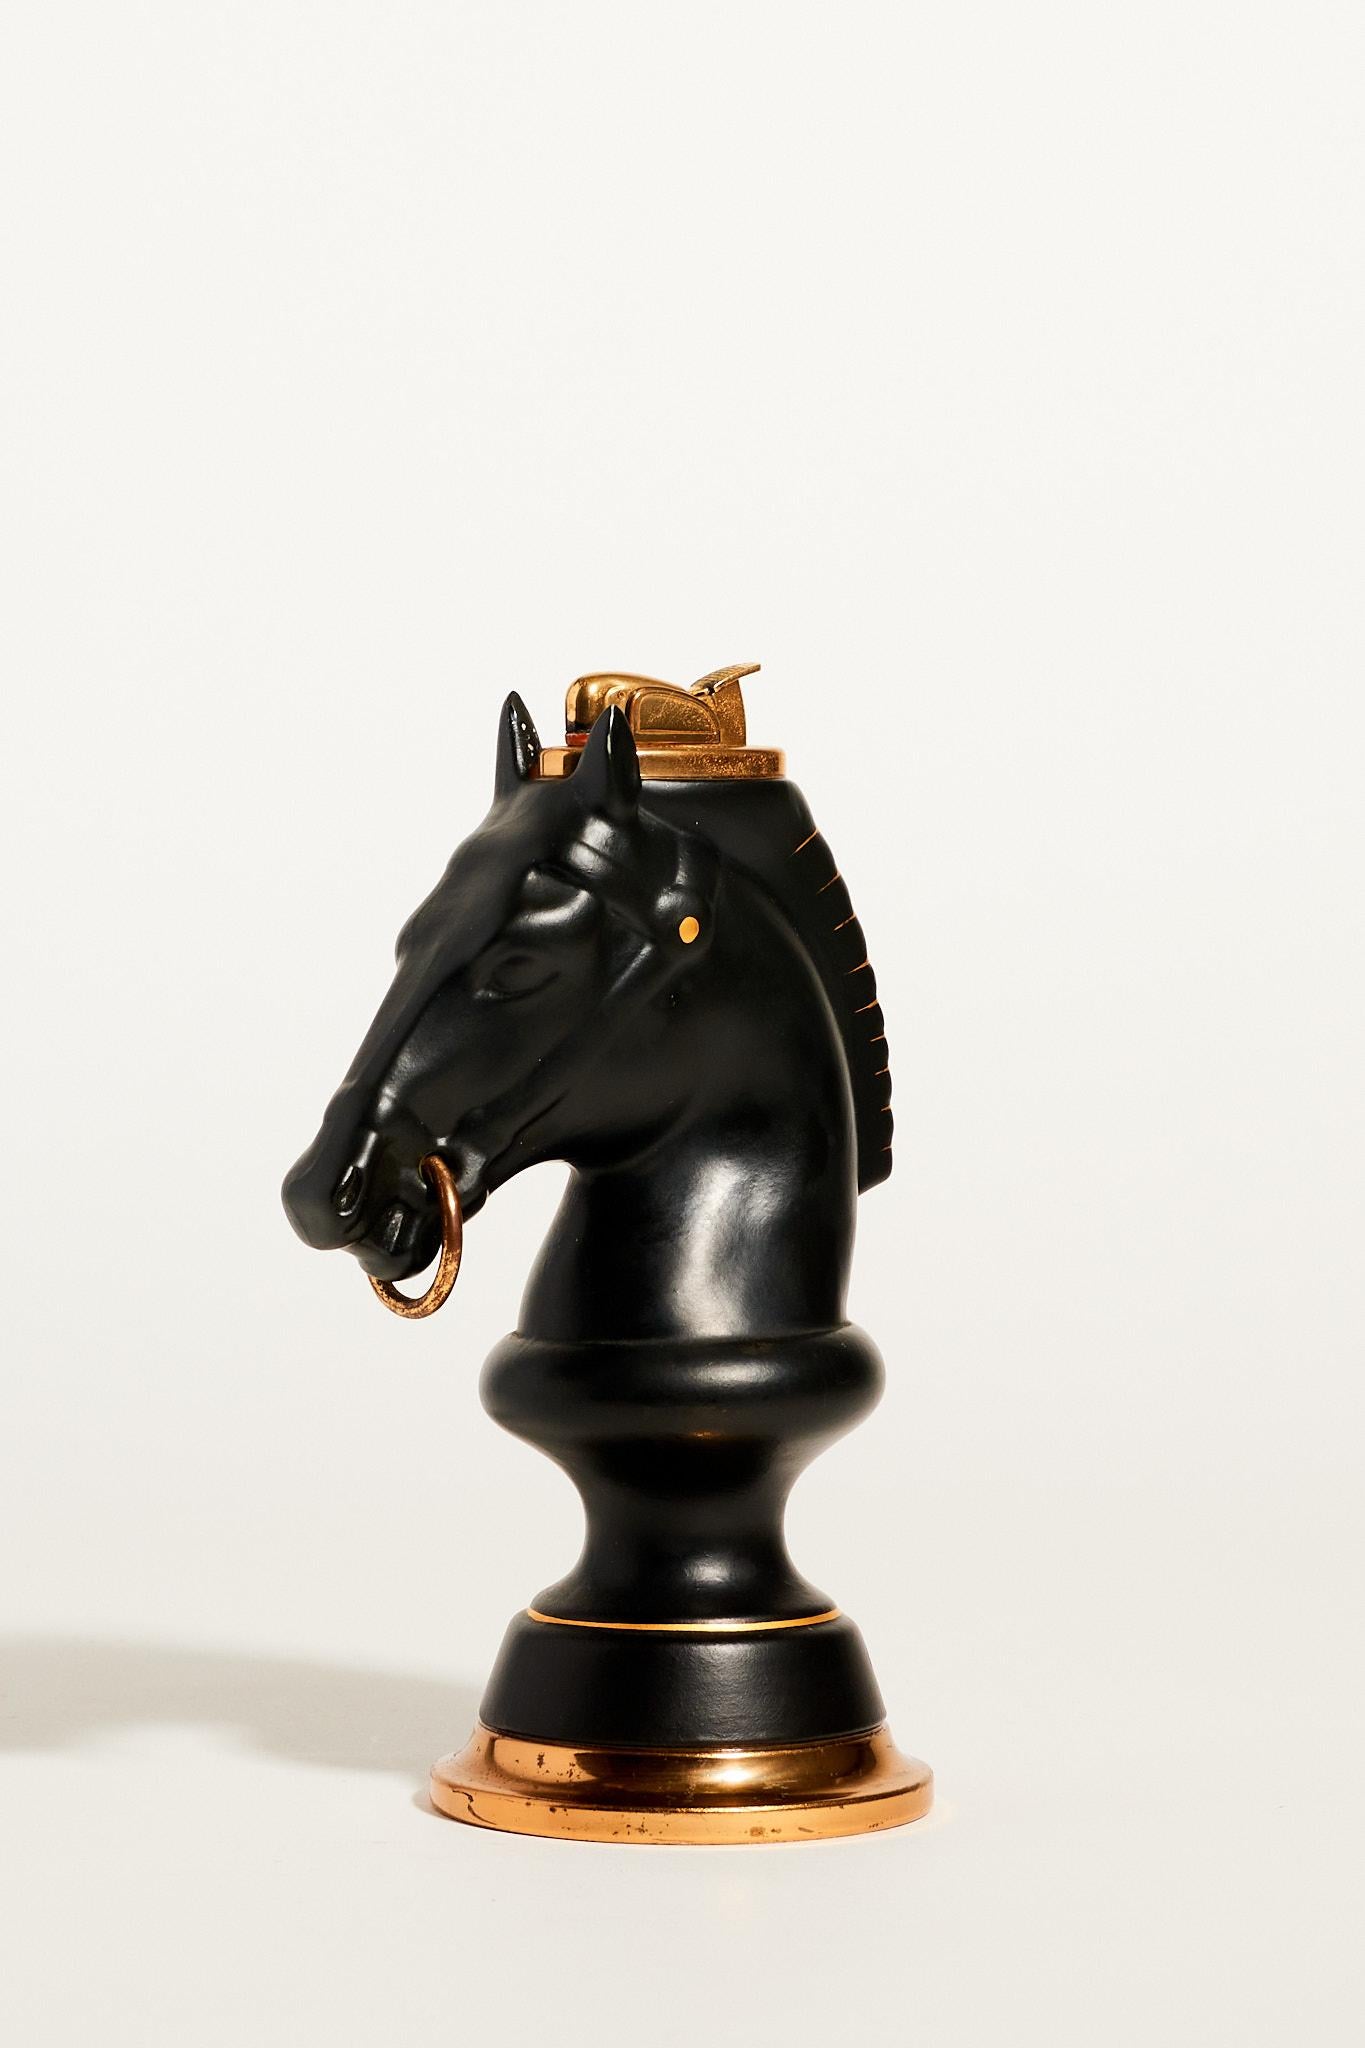 Mid century black trojan horse lighter with gold details.

*Lighters cannot be shipped with fluid inside because it is considered a hazardous material, but we have taken the lighter in to get checked and were told it could be in working condition